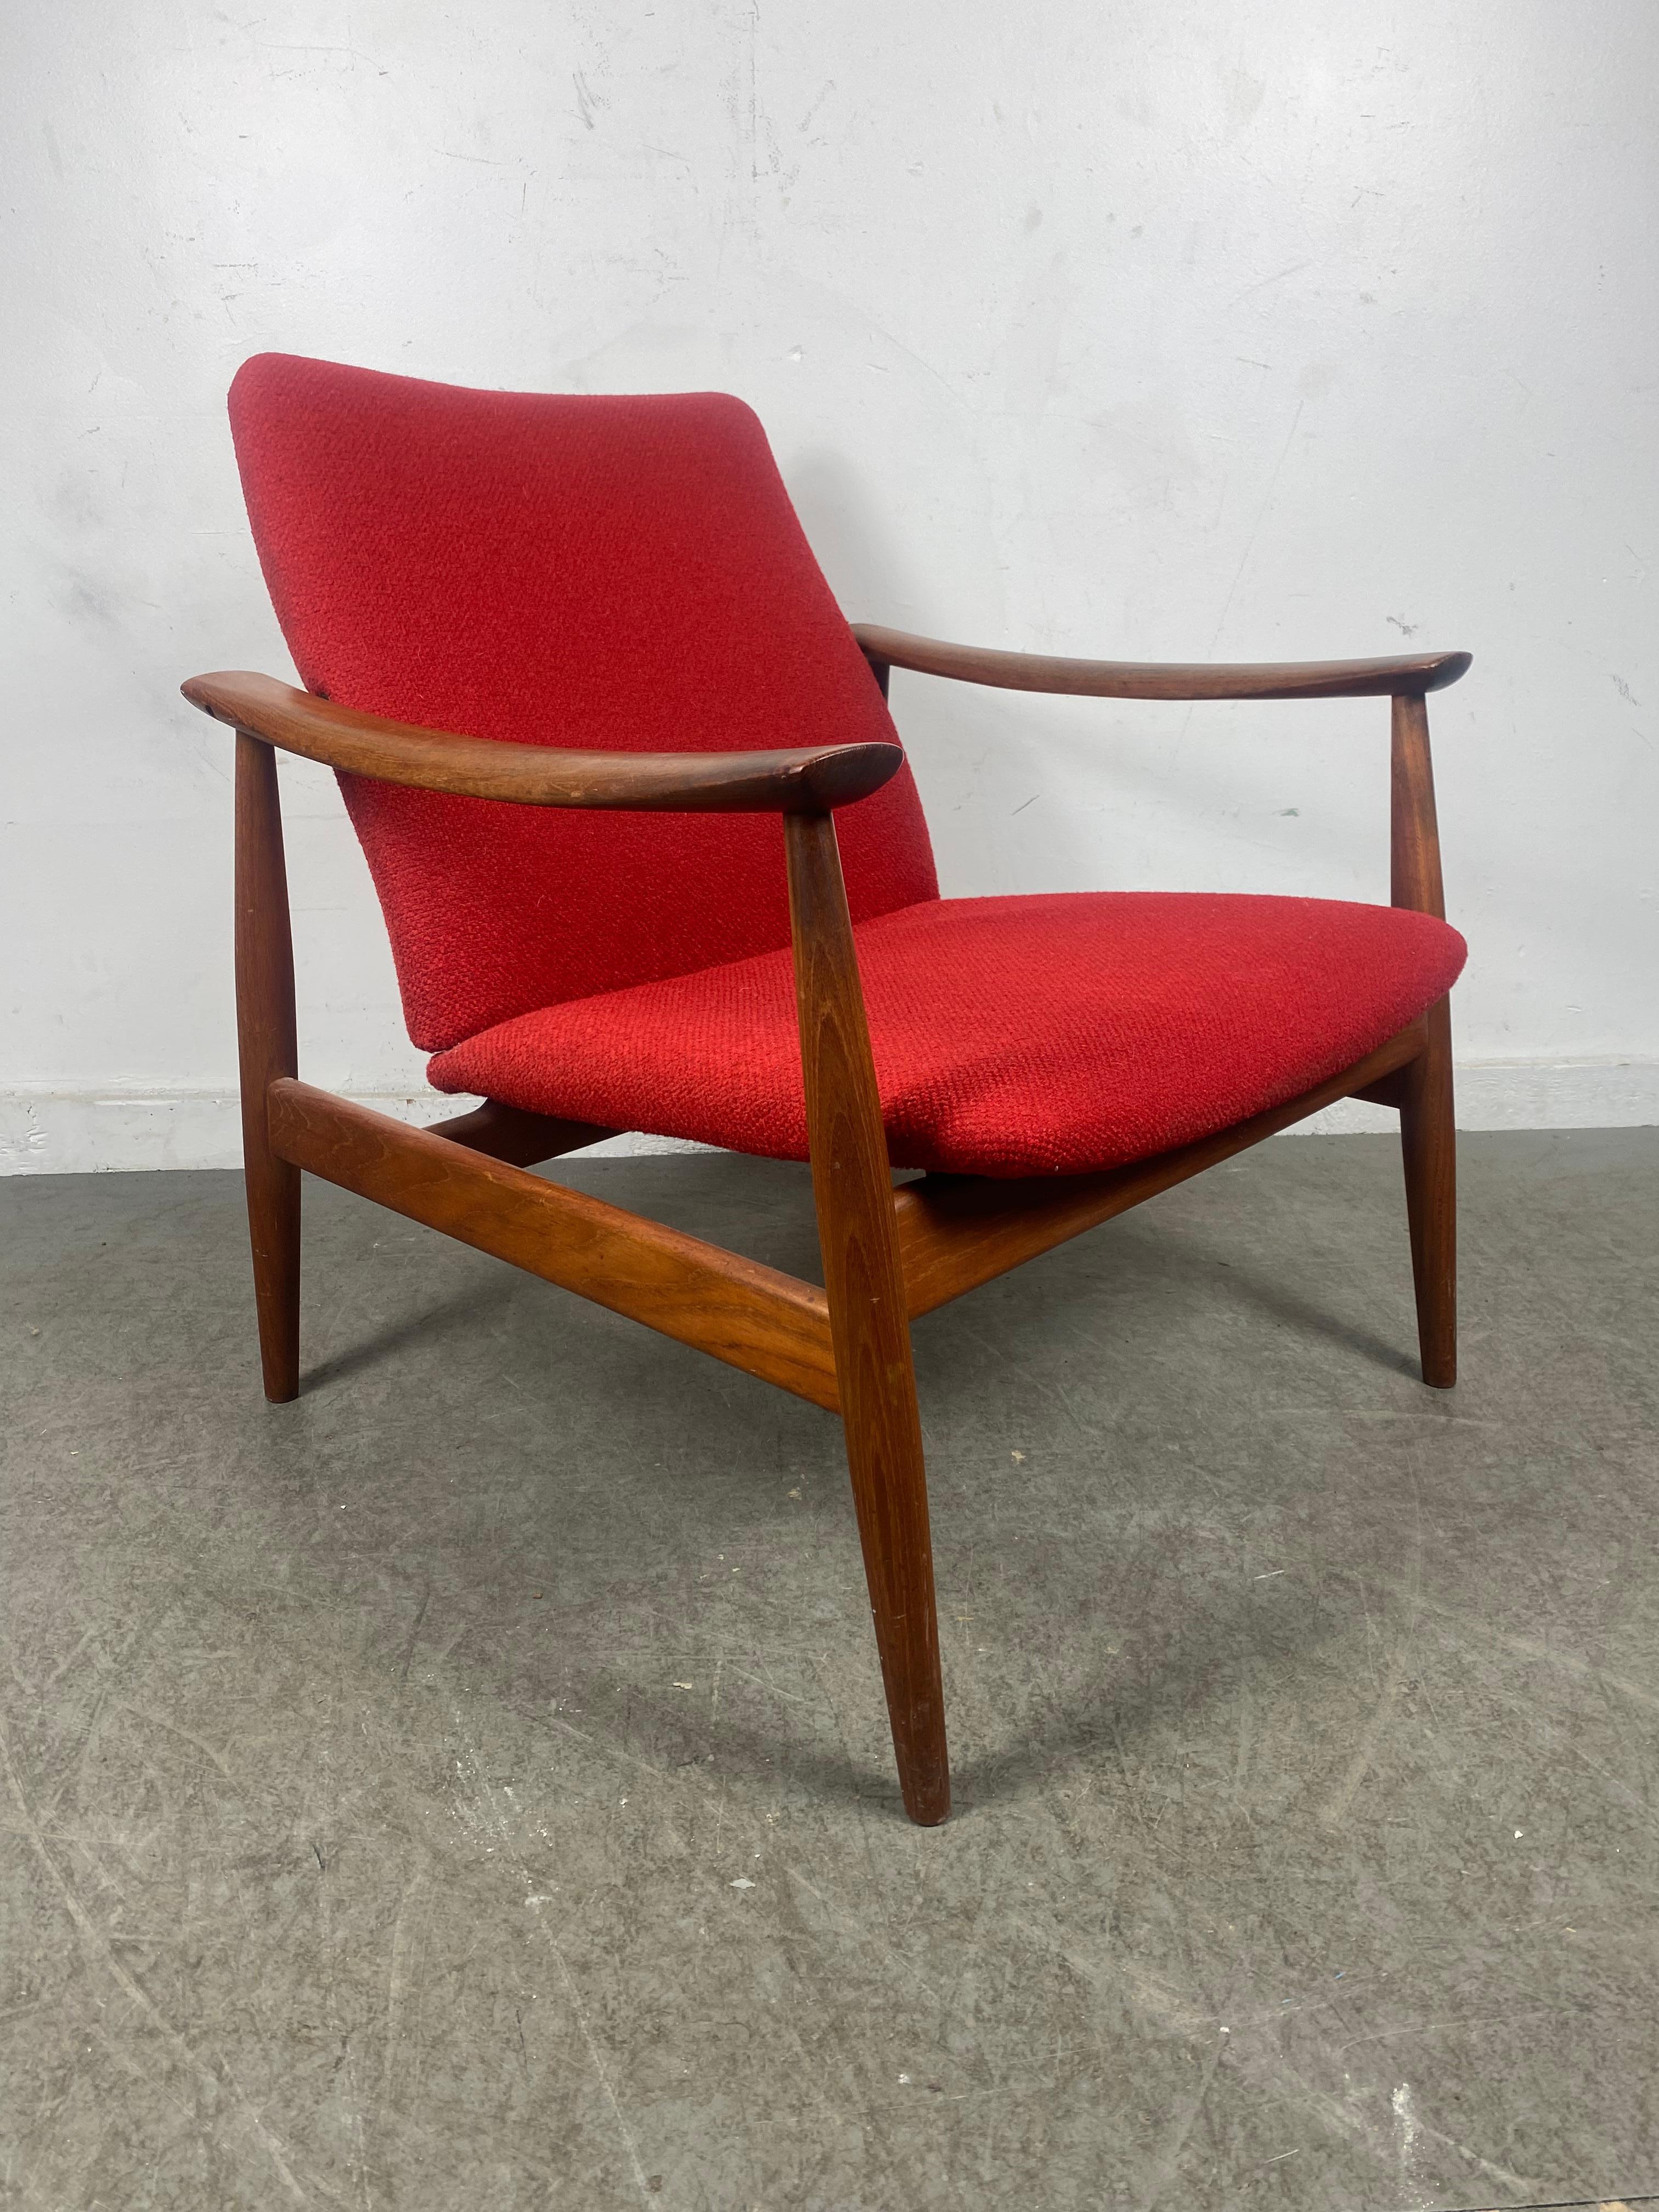 Finn Juhl Easy Chair Model 138 Produced by France & Son in Denmark In Good Condition For Sale In Buffalo, NY